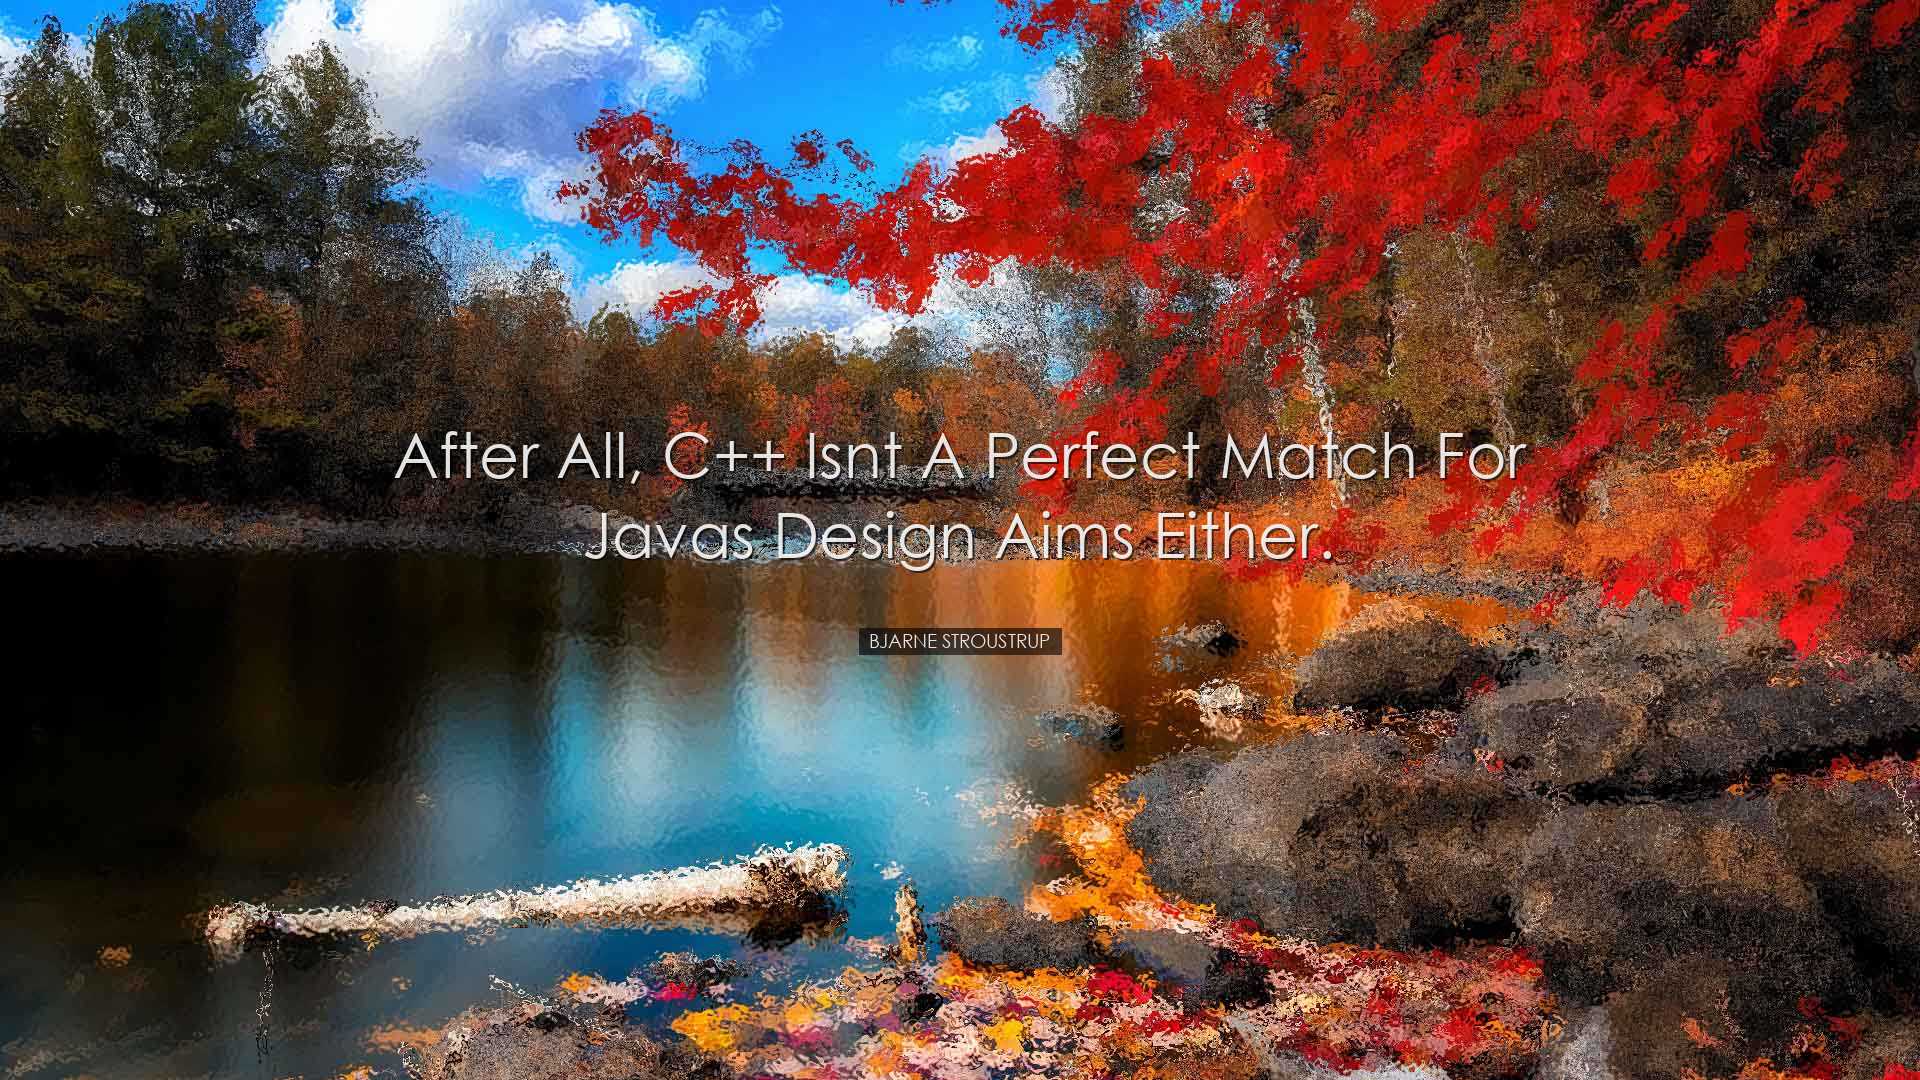 After all, C++ isnt a perfect match for Javas design aims either.